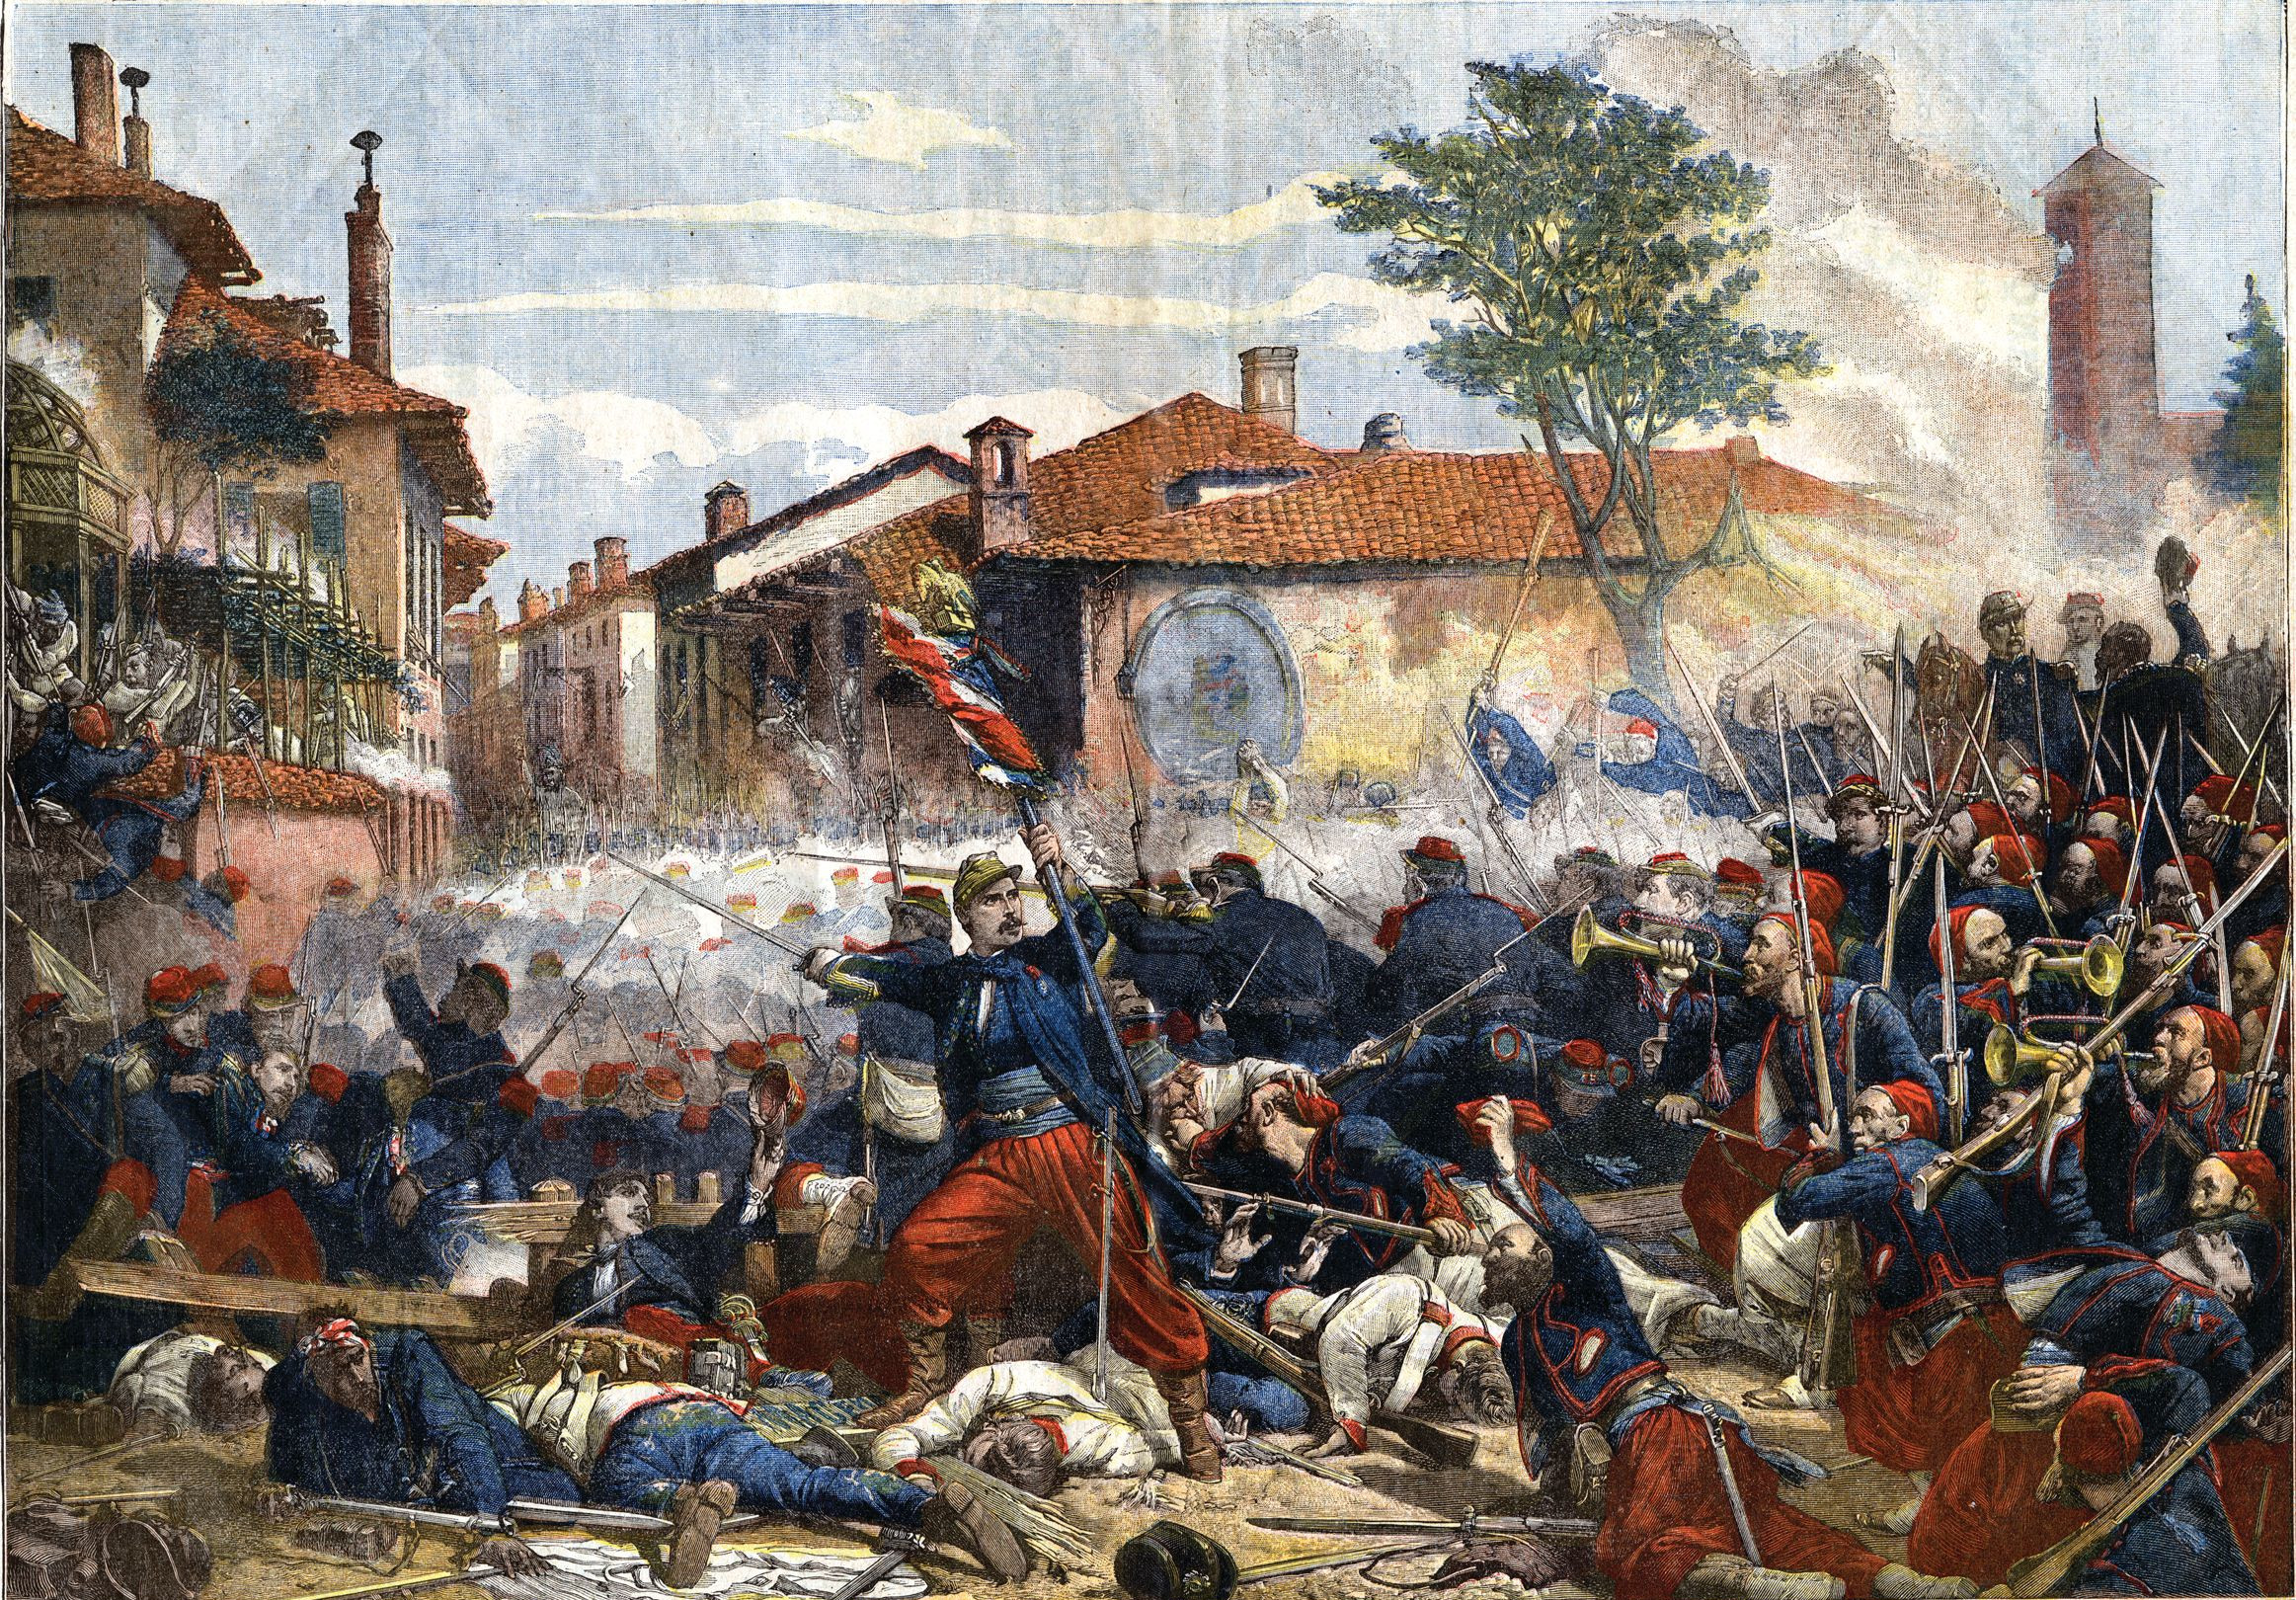 French Zouaves storm the Ponte Nuova Bridge shouting “Vive l’Empereur!” The Austrians kept up a galling fire from a nearby building, but the fierce Zouaves took the building with the cold steel of their bayonets.